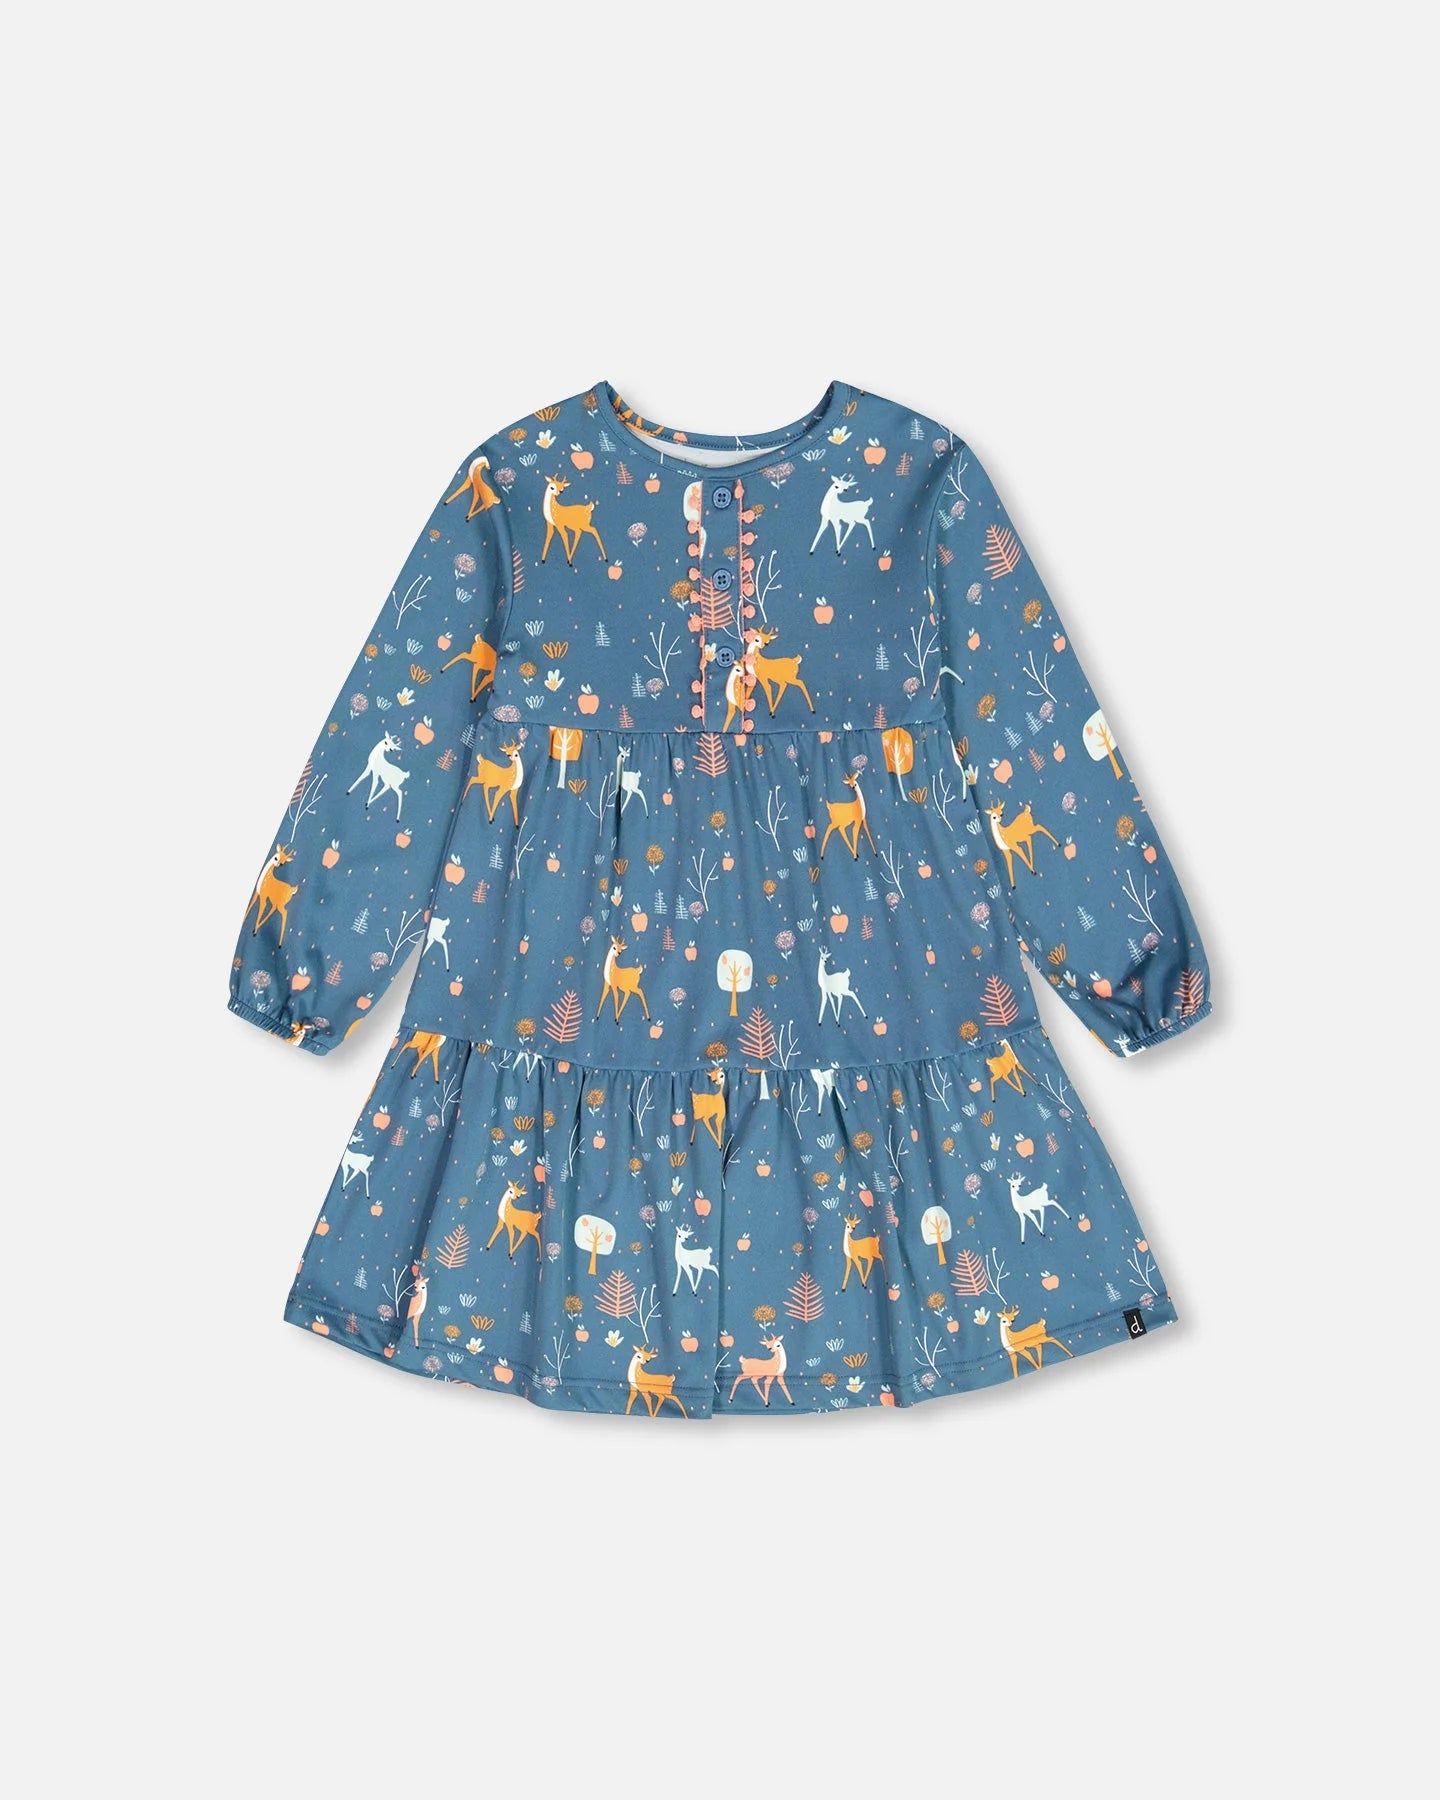 L/S Dress Teal Blue Fawns And Apples Print